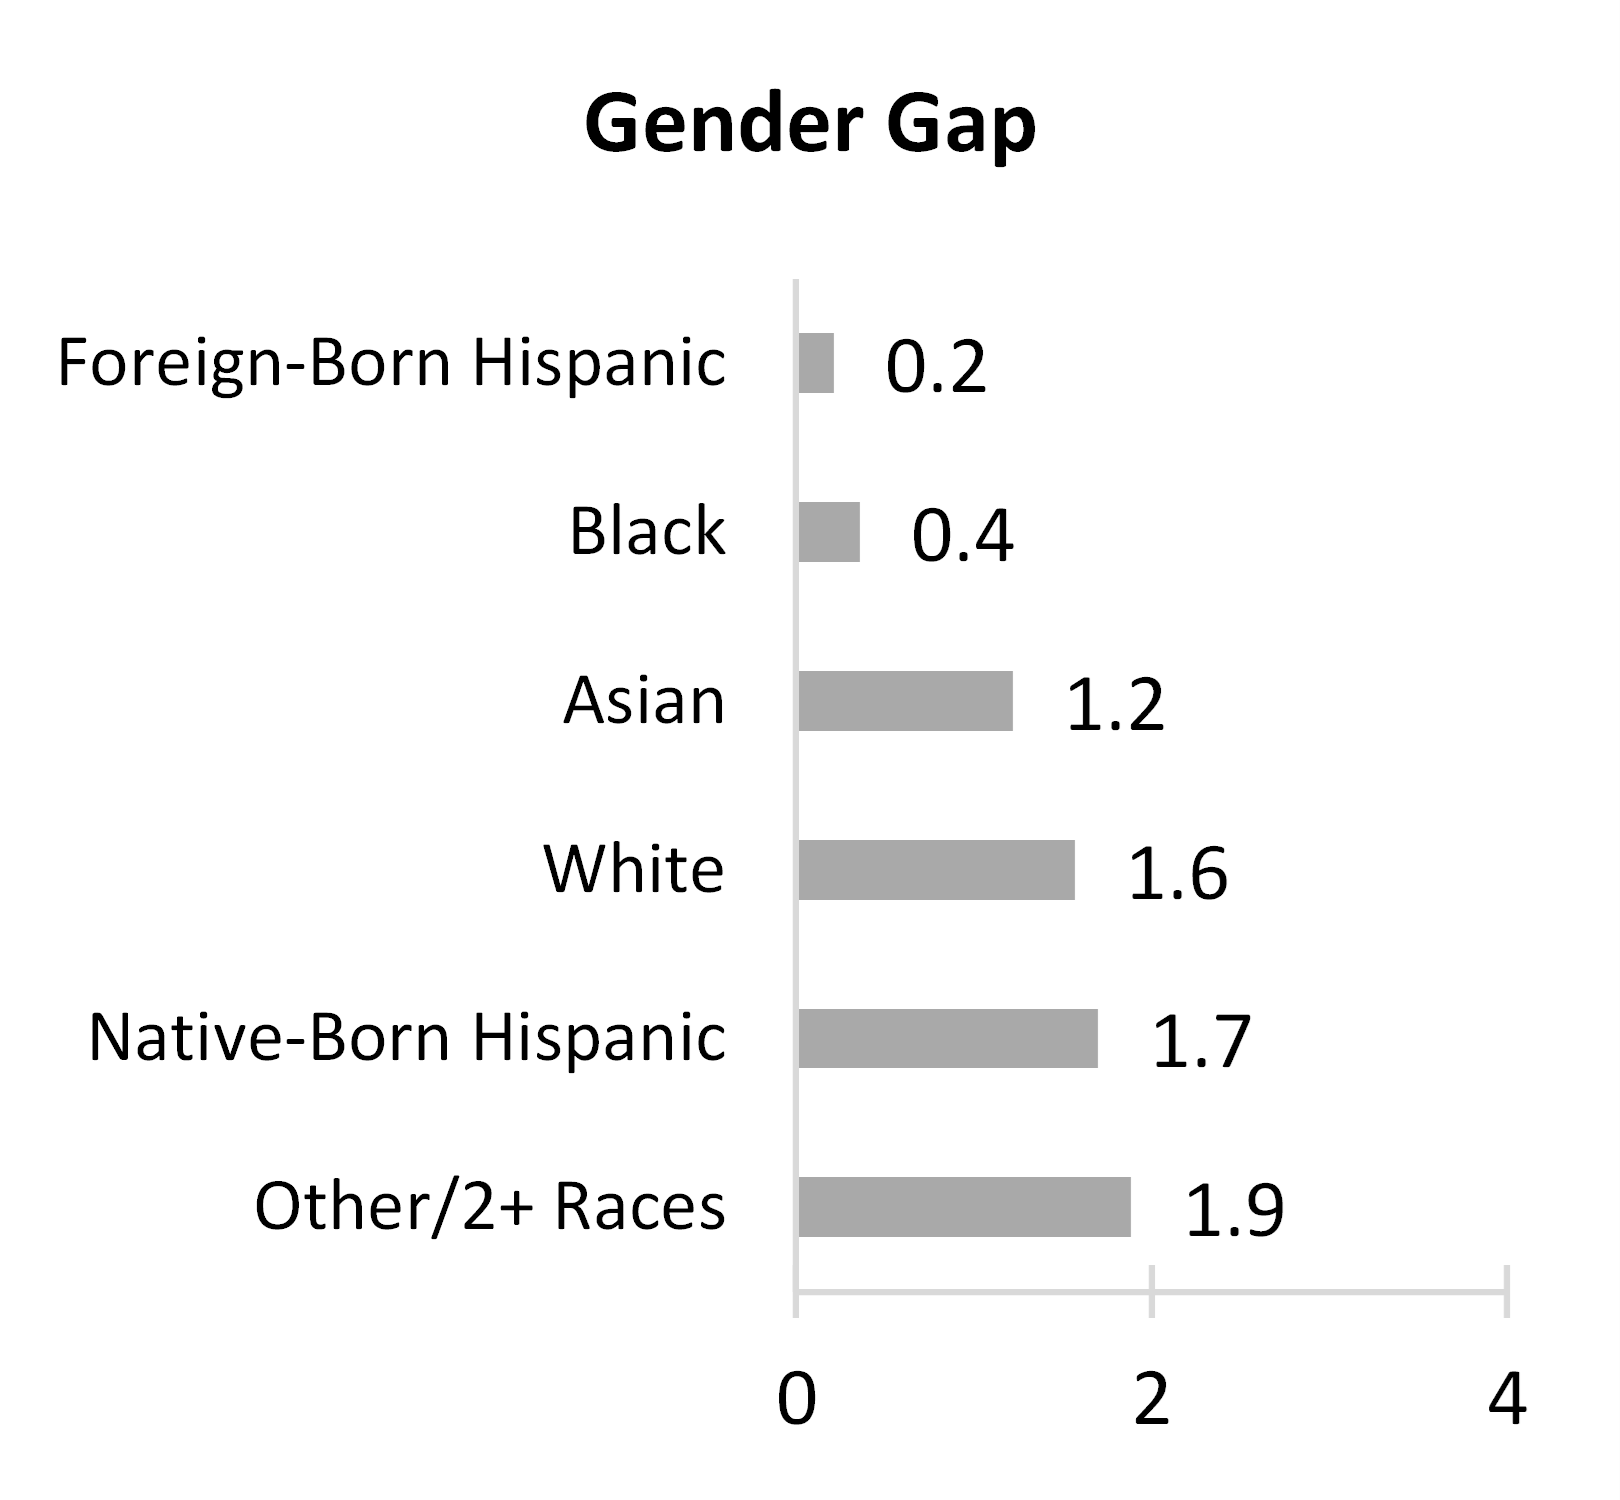 Figure 2. Median Age at First Marriage by Race and Ethnicity, 2020 - Gender Gap